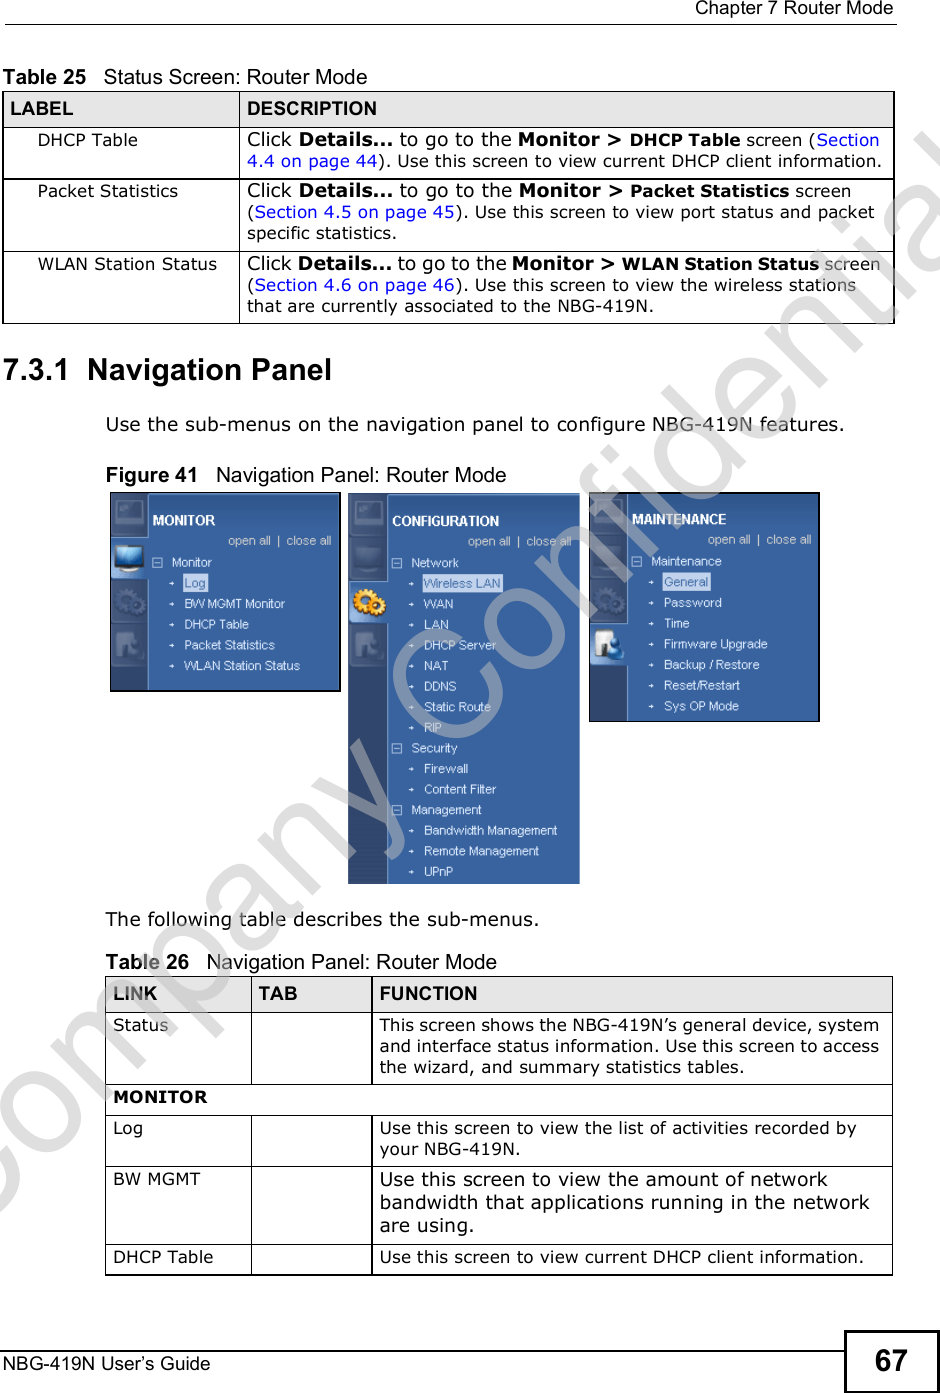  Chapter 7Router ModeNBG-419N User s Guide 677.3.1  Navigation PanelUse the sub-menus on the navigation panel to configure NBG-419N features. Figure 41   Navigation Panel: Router Mode The following table describes the sub-menus.DHCP Table Click Details... to go to the Monitor &gt; DHCP Table screen (Section 4.4 on page 44). Use this screen to view current DHCP client information.Packet Statistics Click Details... to go to the Monitor &gt; Packet Statistics screen (Section 4.5 on page 45). Use this screen to view port status and packet specific statistics.WLAN Station Status Click Details... to go to the Monitor &gt; WLAN Station Status screen (Section 4.6 on page 46). Use this screen to view the wireless stations that are currently associated to the NBG-419N.Table 25   Status Screen: Router Mode LABEL DESCRIPTIONTable 26   Navigation Panel: Router ModeLINK TAB FUNCTIONStatus This screen shows the NBG-419N!s general device, system and interface status information. Use this screen to access the wizard, and summary statistics tables.MONITORLog Use this screen to view the list of activities recorded by your NBG-419N.BW MGMT Use this screen to view the amount of network bandwidth that applications running in the network are using.DHCP Table Use this screen to view current DHCP client information.Company Confidential